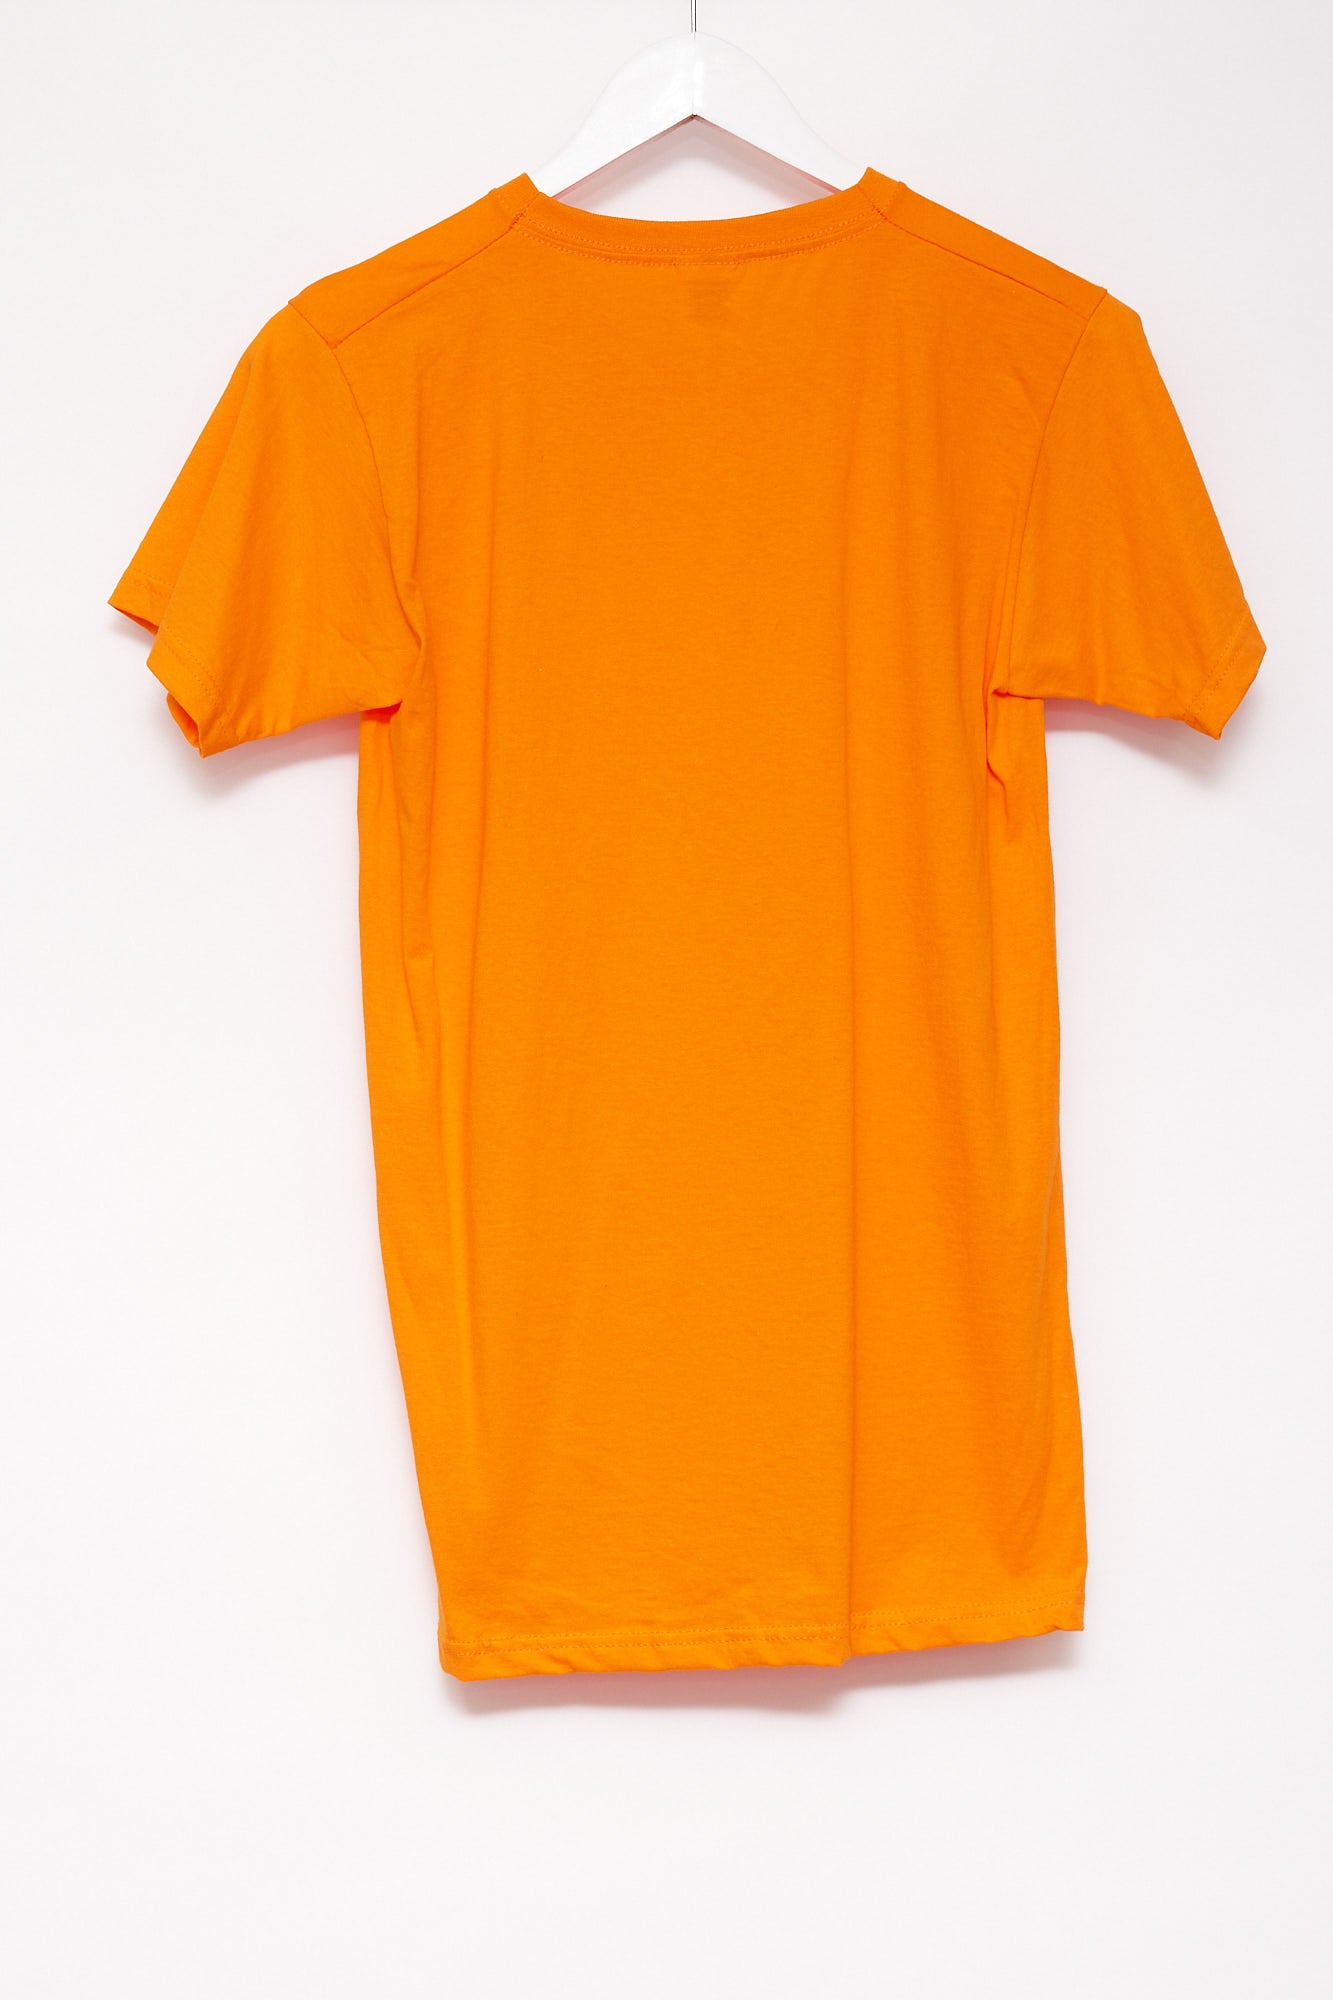 Mens Fruit of the Loom Orange T-shirt: size Small